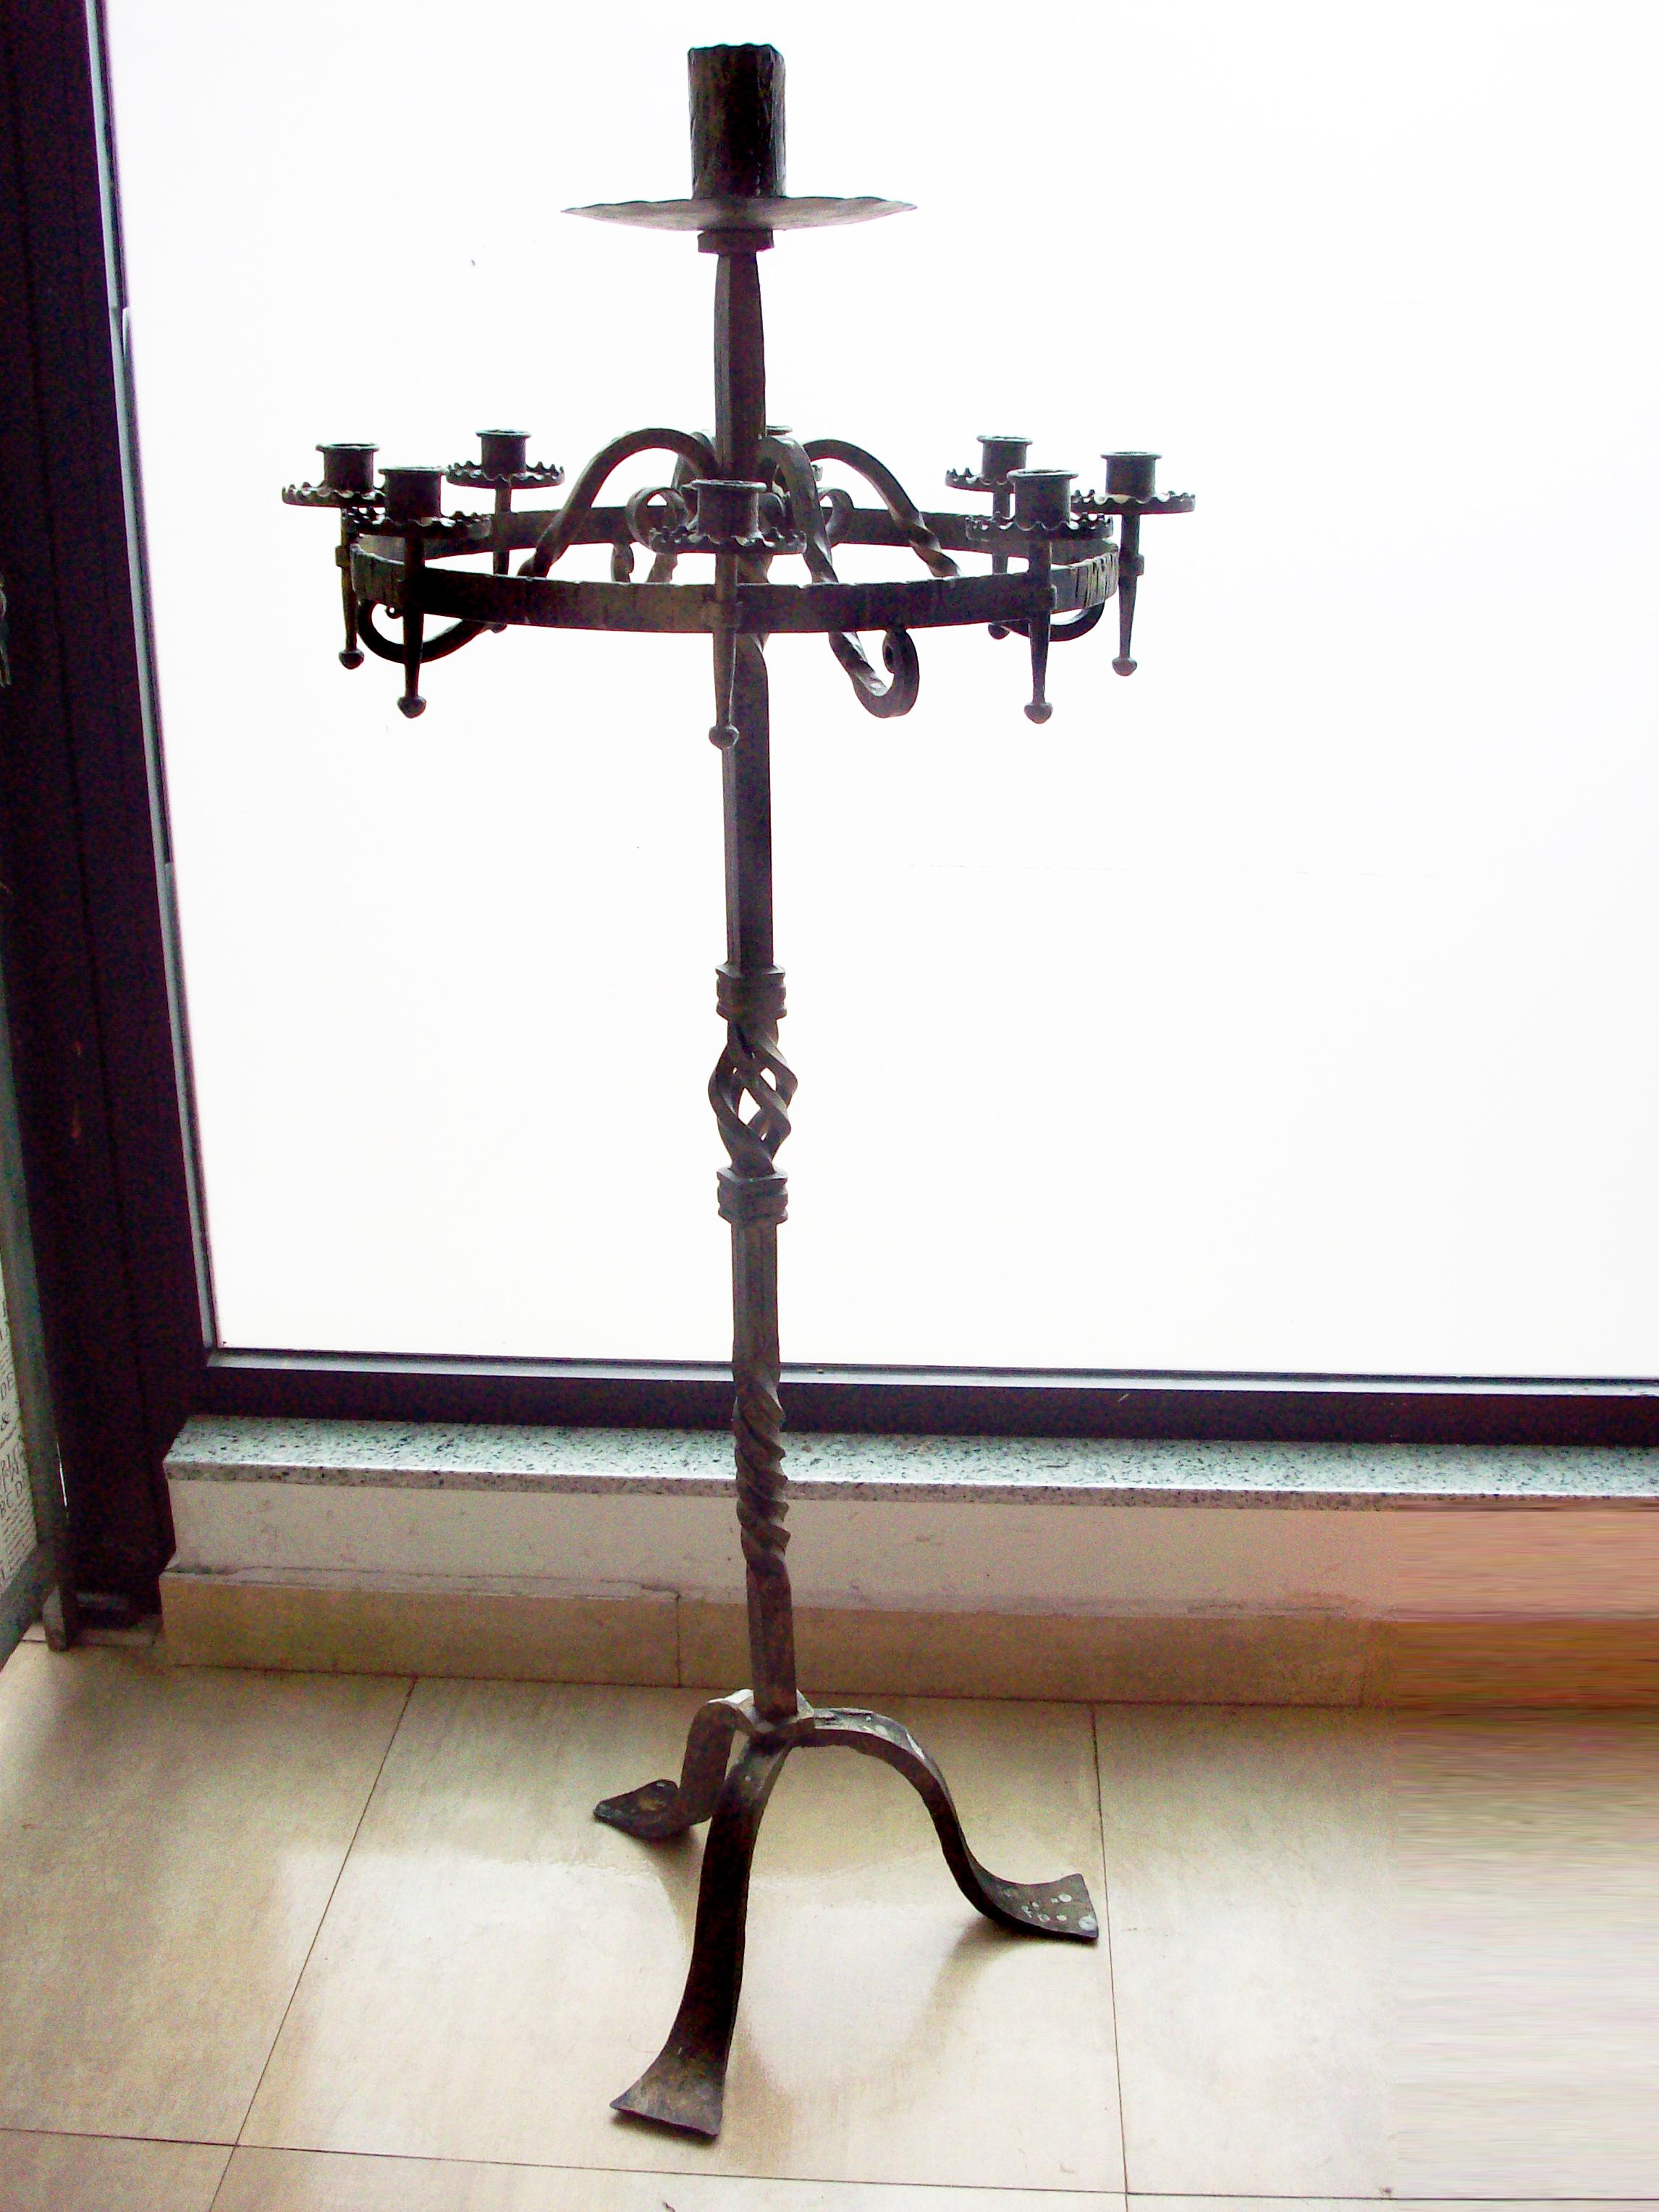 Floor Candle Stands with 9 Candles, Wrought Iron, Spainish Medieval Style For Sale 1